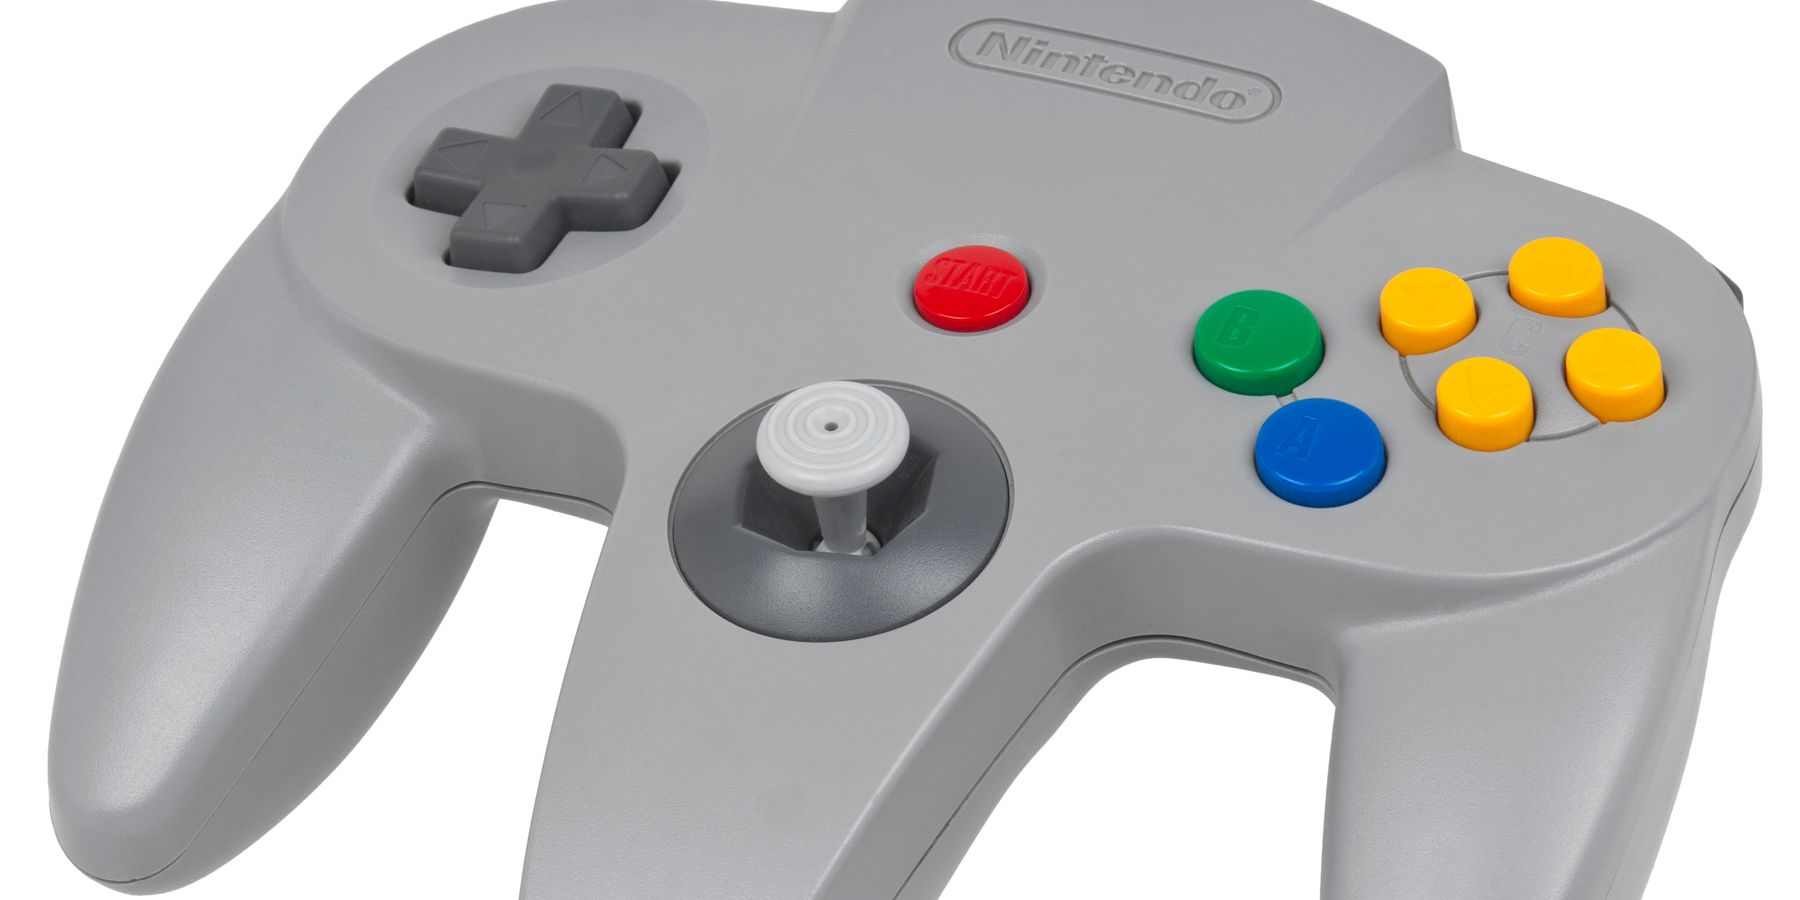 Gamer Finds Nintendo 64 Controller in Unexpected Place While on Walk